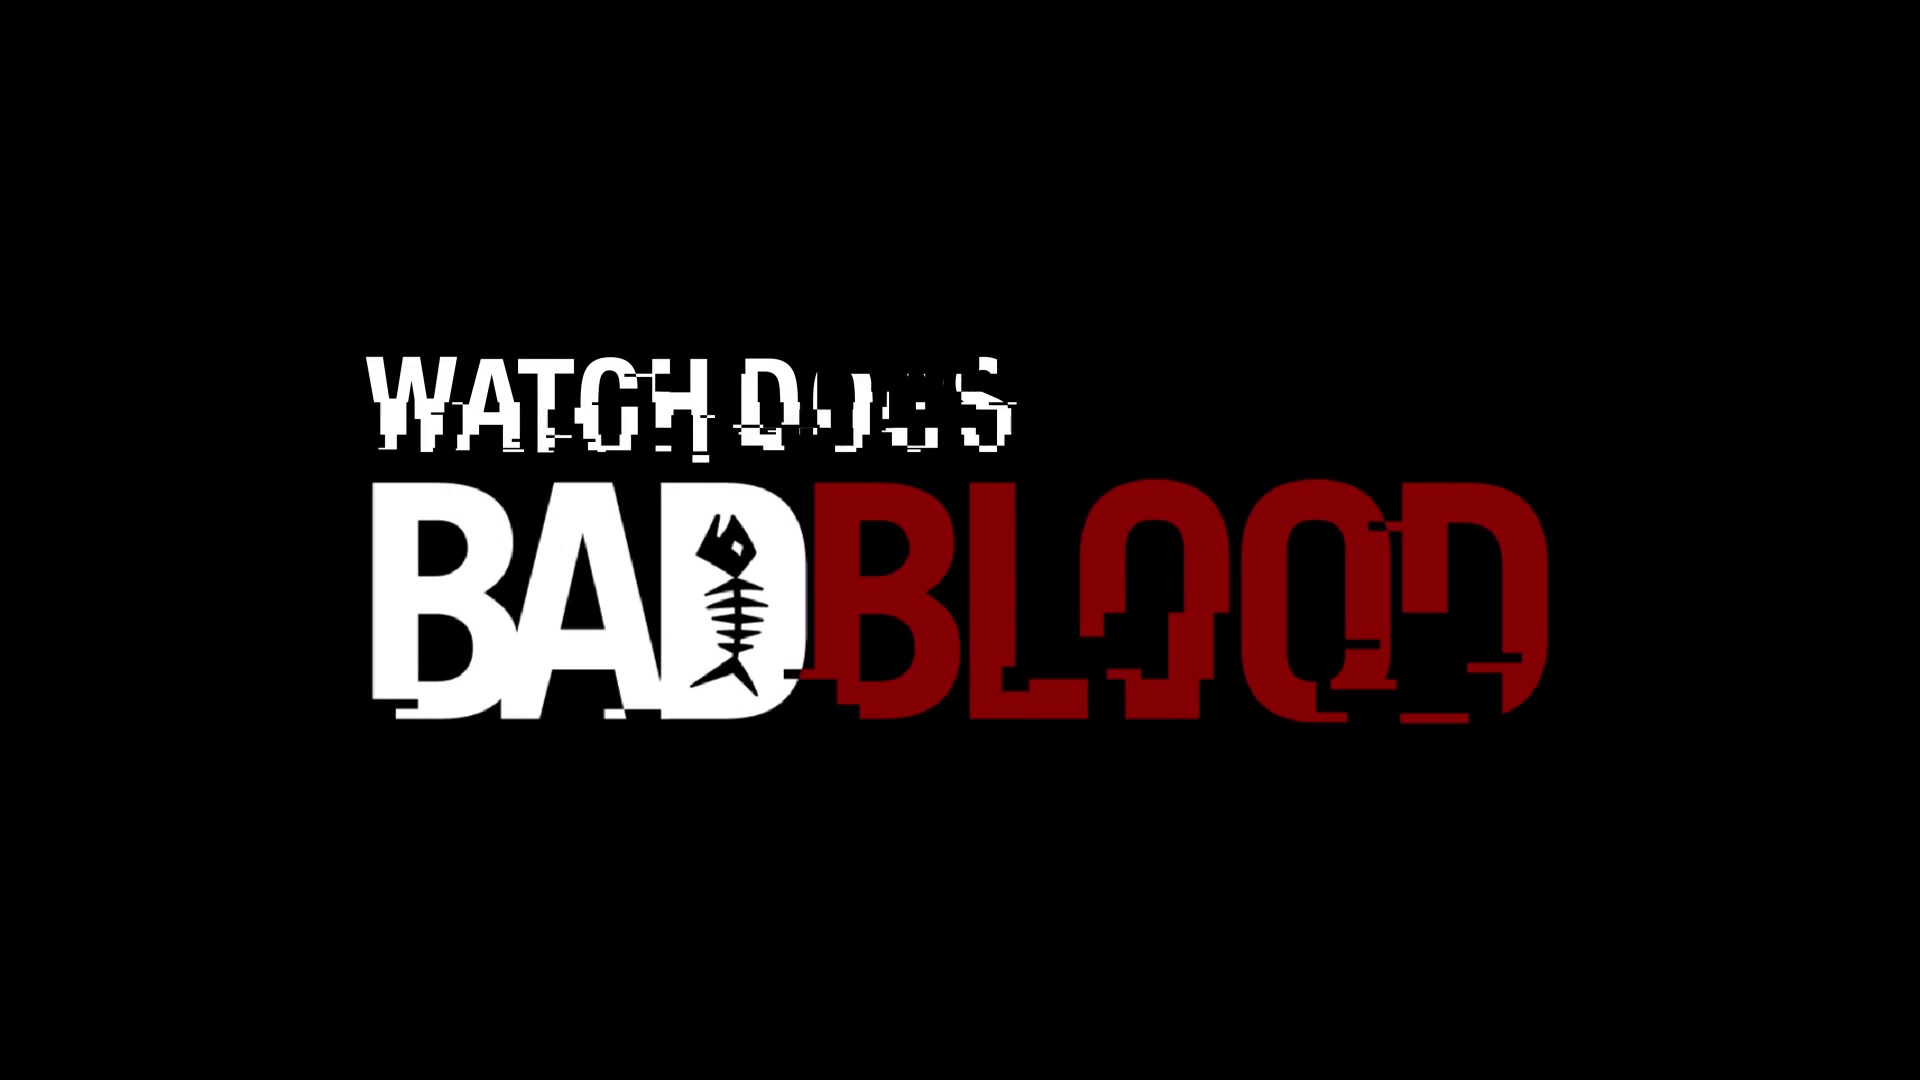 watch dogs, video game, logo, watch dogs: bad blood